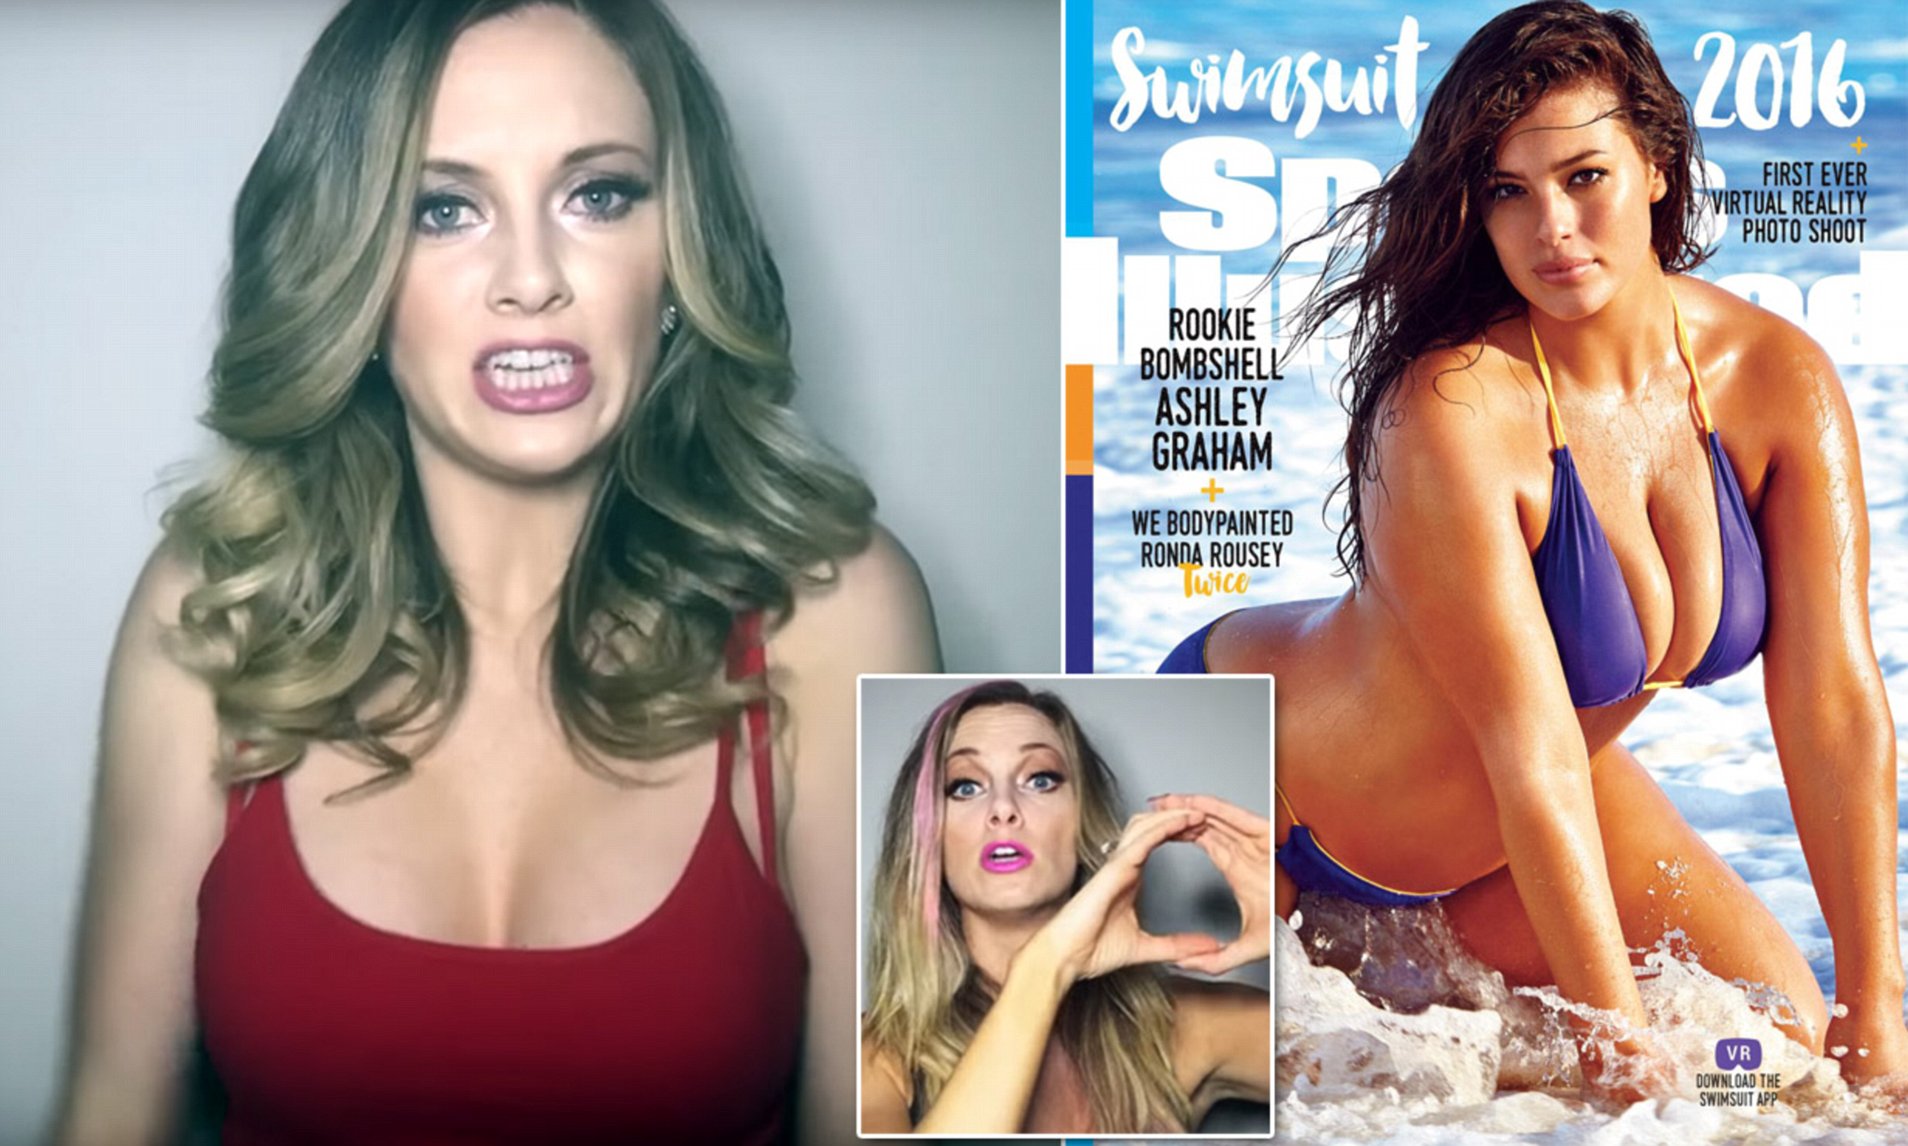 cory hoffman recommends nicole arbour hot pic